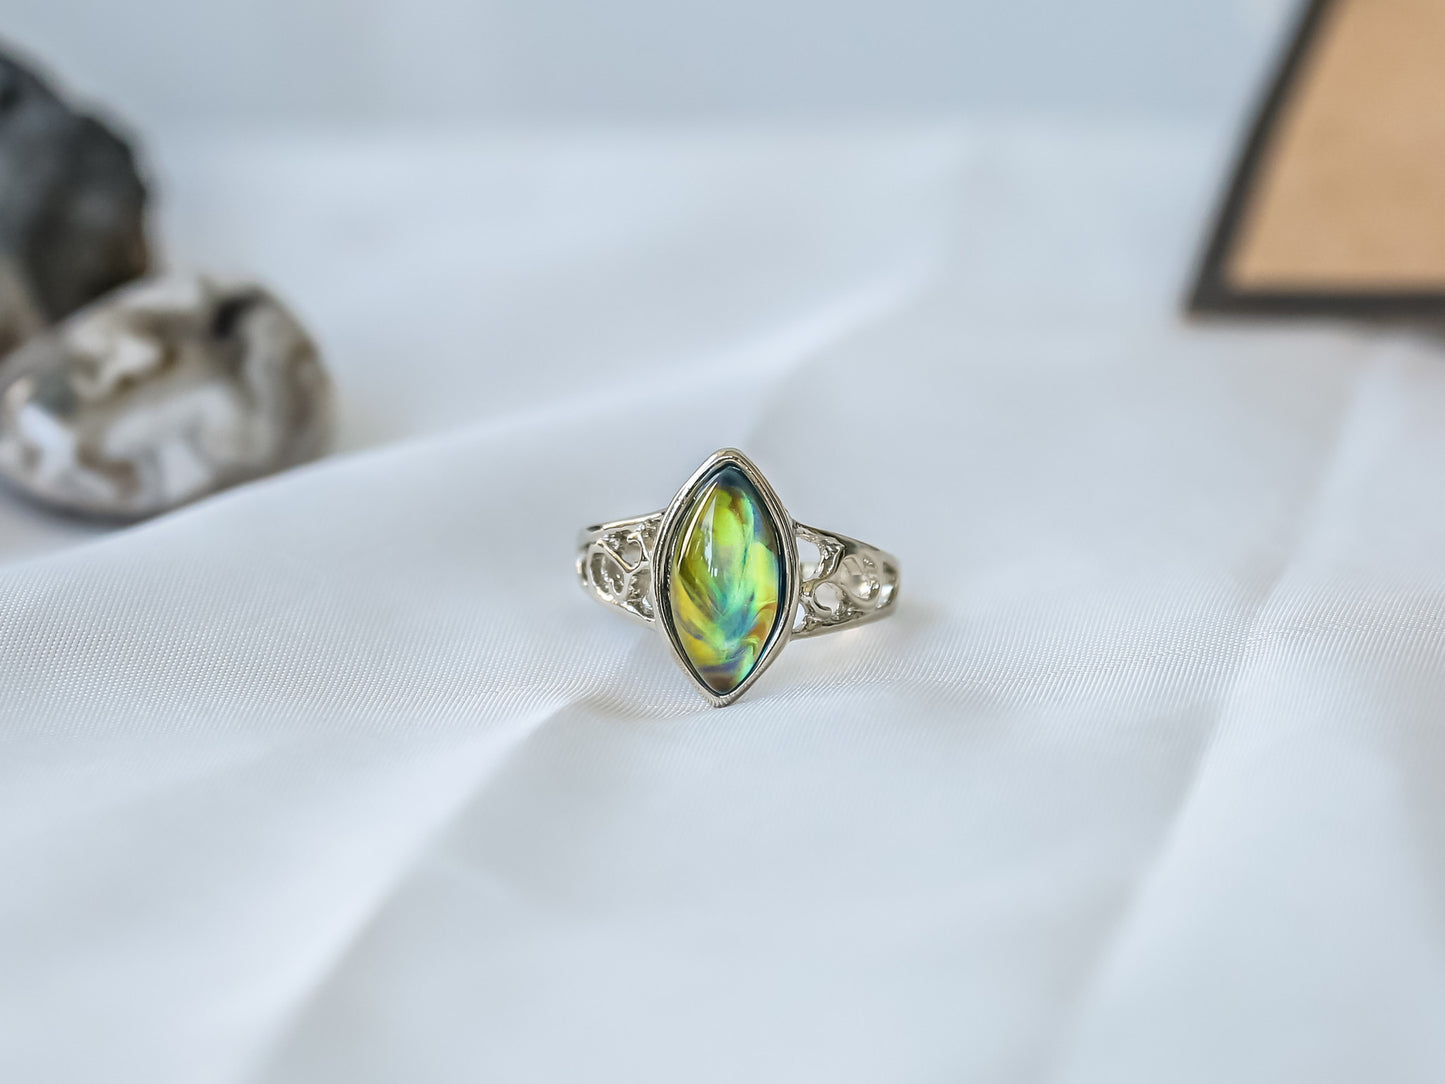 Limited Edition Opalescent Horses Eye Stone Mood Ring.